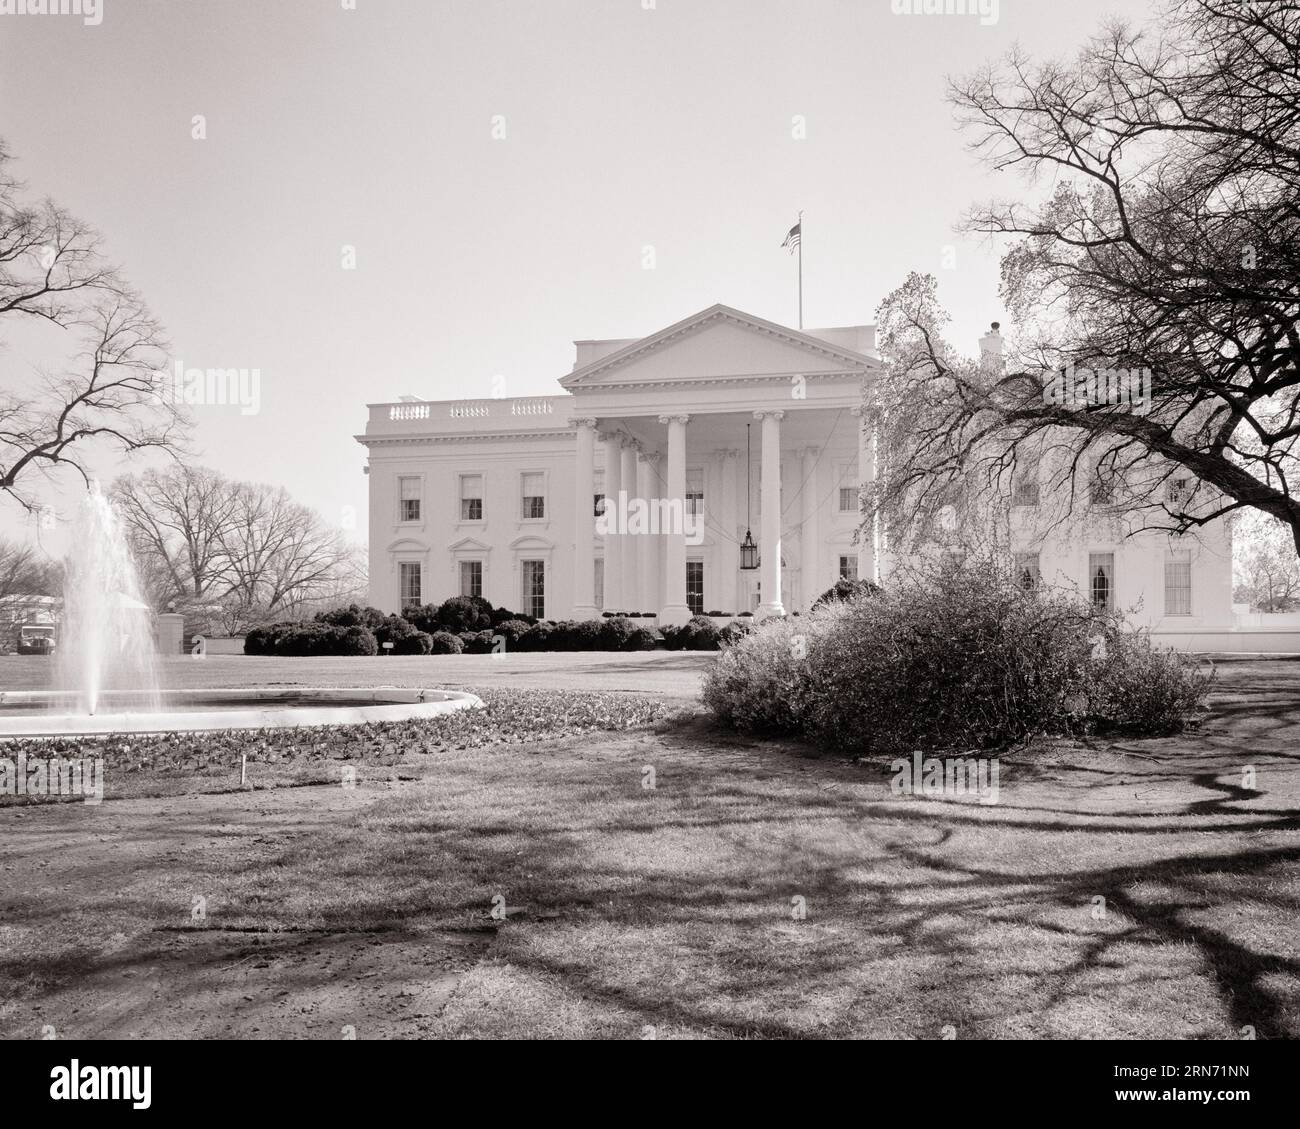 1970s NORTHERN FACADE OF THE WHITE HOUSE OFFICIAL RESIDENCE OF THE PRESIDENT OF THE UNITED STATES IN WASHINGTON DC USA - r24347 HAR001 HARS PRESIDENTIAL NEOCLASSICAL AUTHORITY POLITICS CAPITAL REAL ESTATE CONCEPTUAL STRUCTURES CITIES OFFICIAL RESIDENCE EDIFICE FACADE BLACK AND WHITE DISTRICT FEDERAL HAR001 OLD FASHIONED PALLADIAN WHITE HOUSE Stock Photo